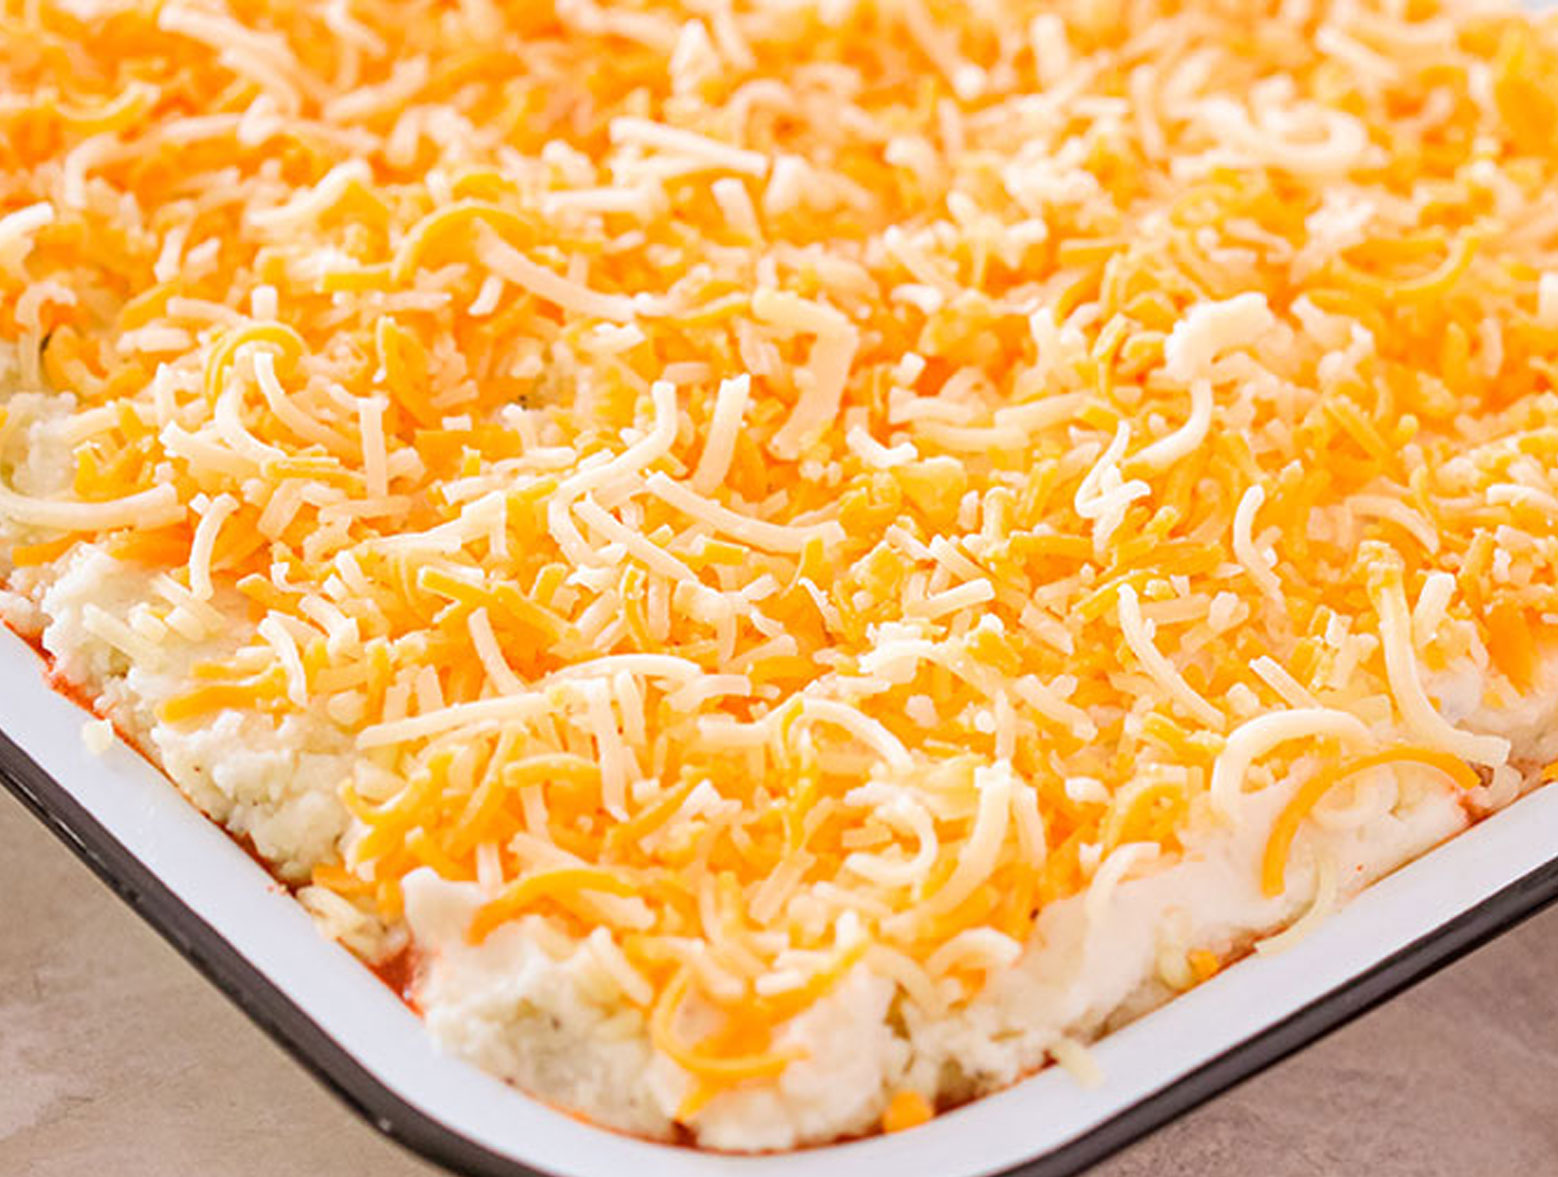 Chili mashed potato casserole covered in shredded cheese